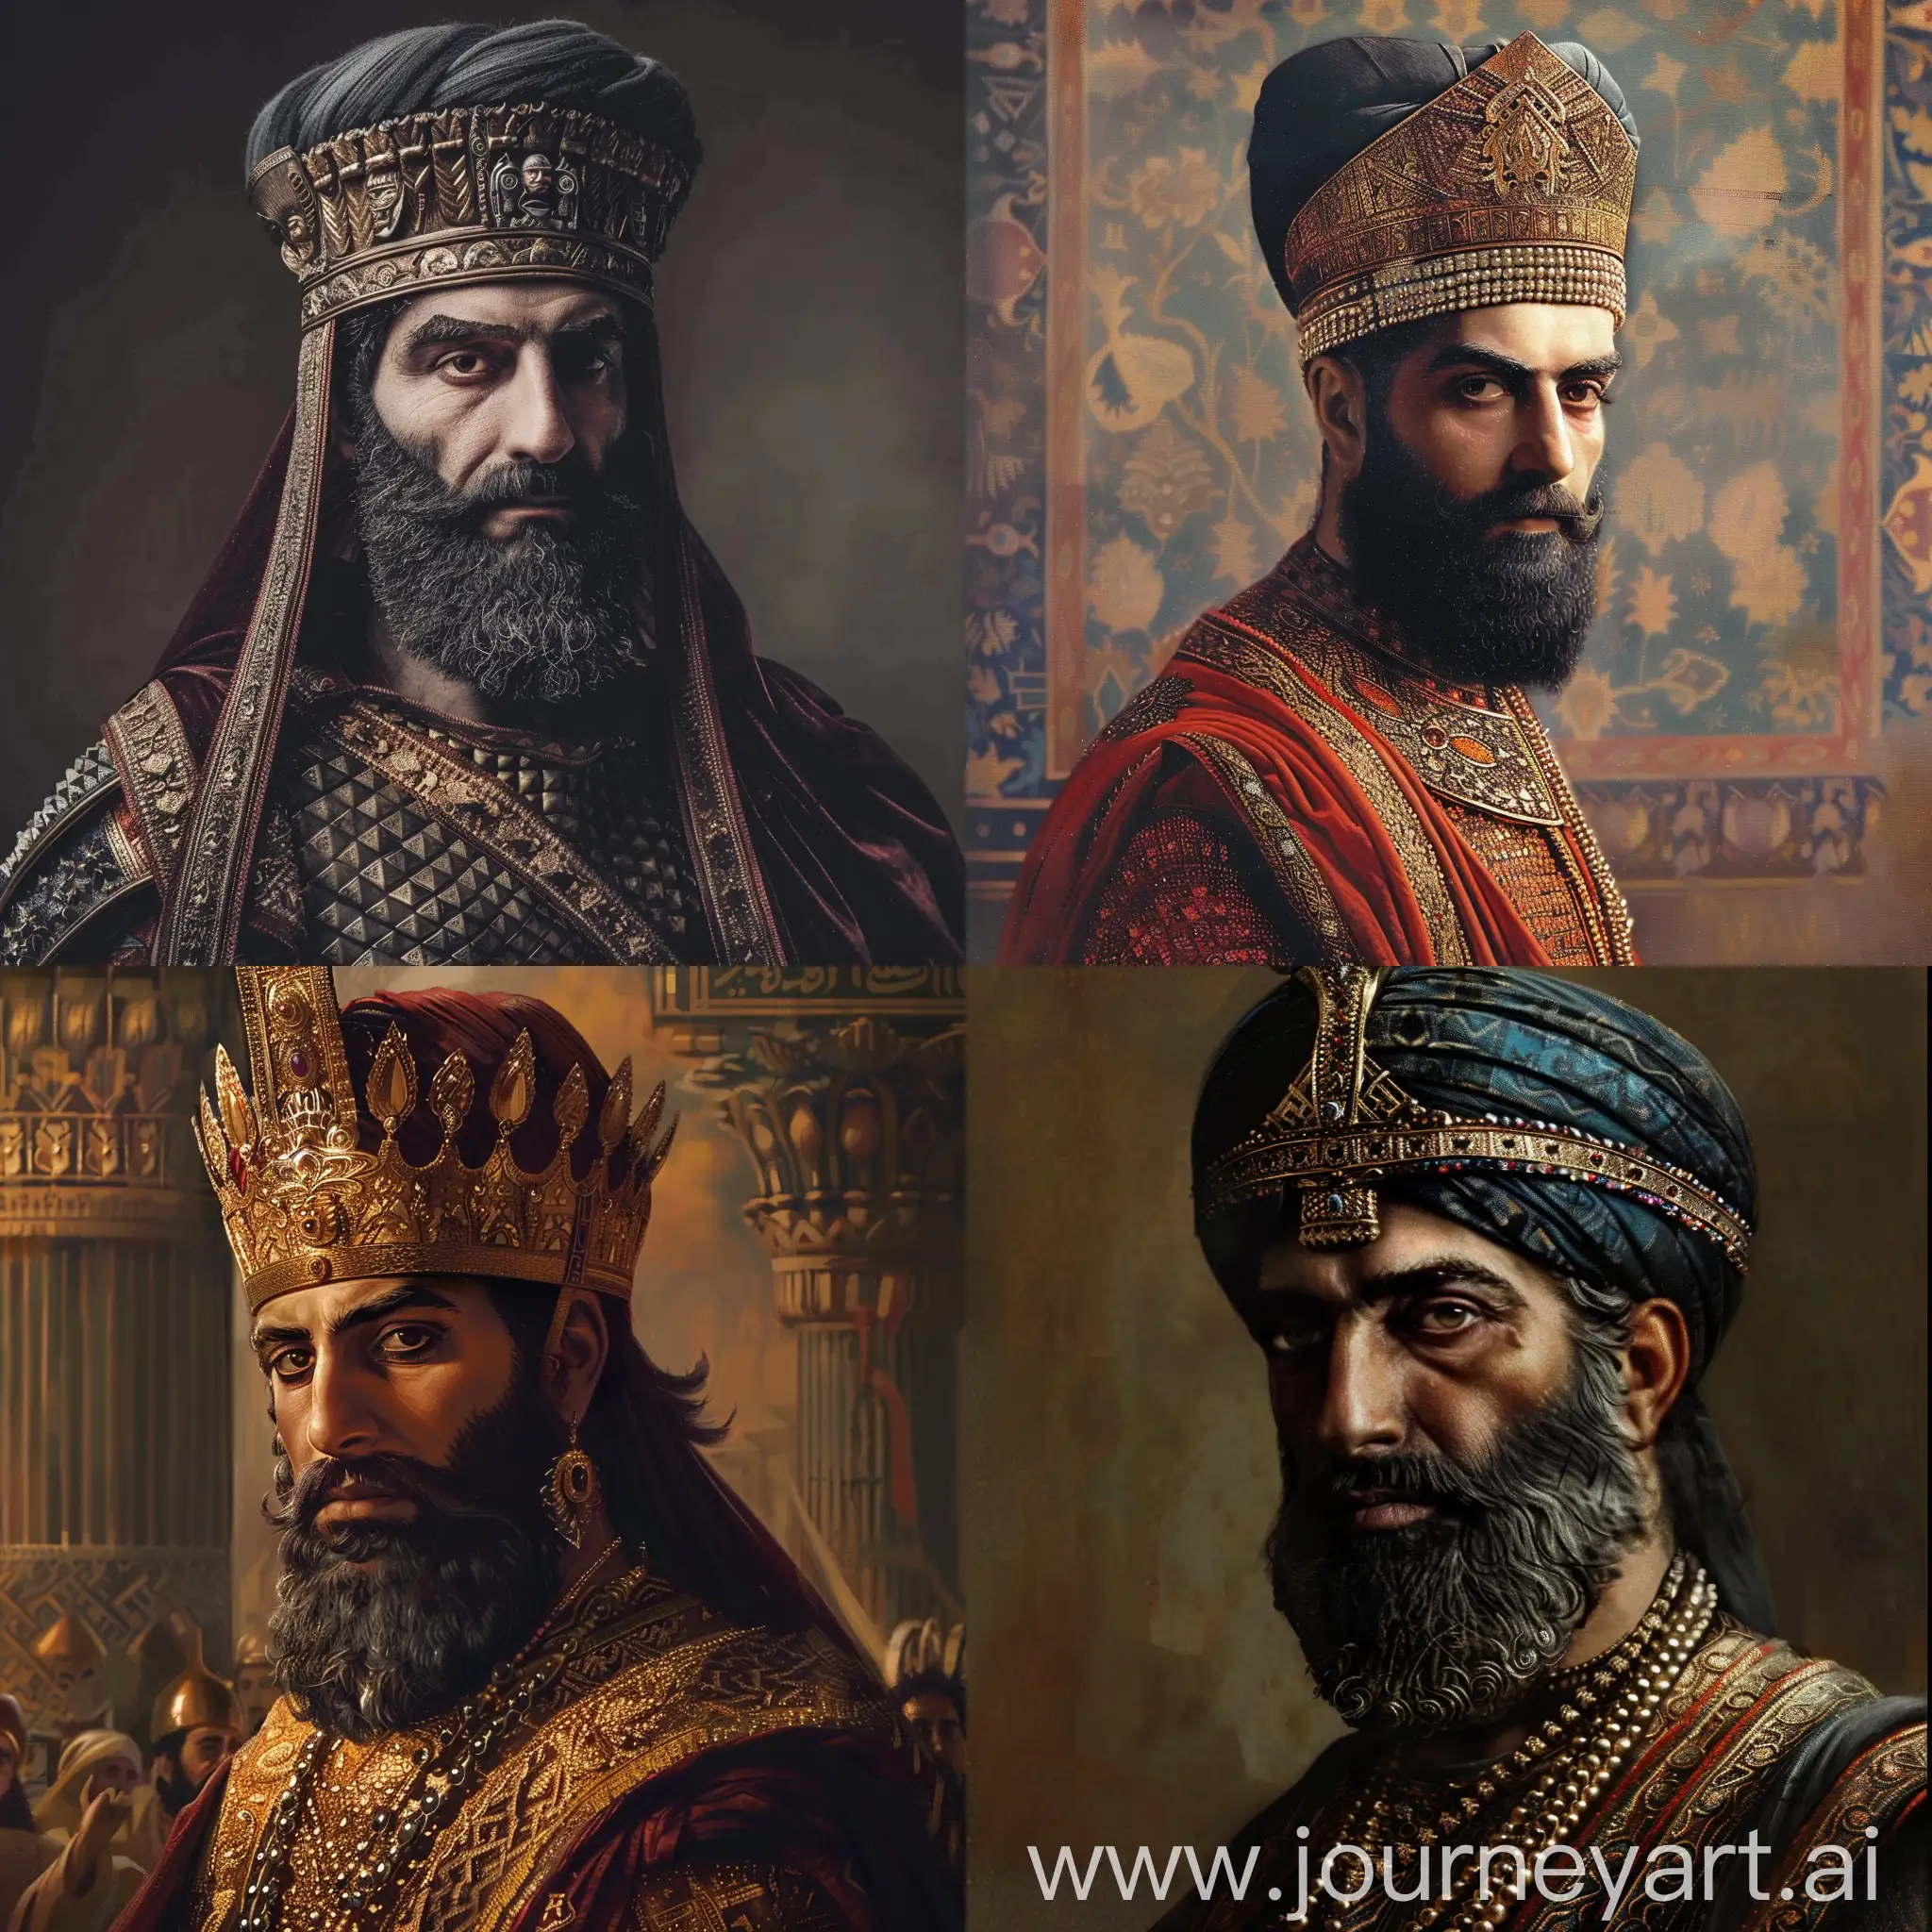 Find the photos of Sassanid kings on the web and reconstruct the photo of Khosrow Anushirvan for me based on the photos.